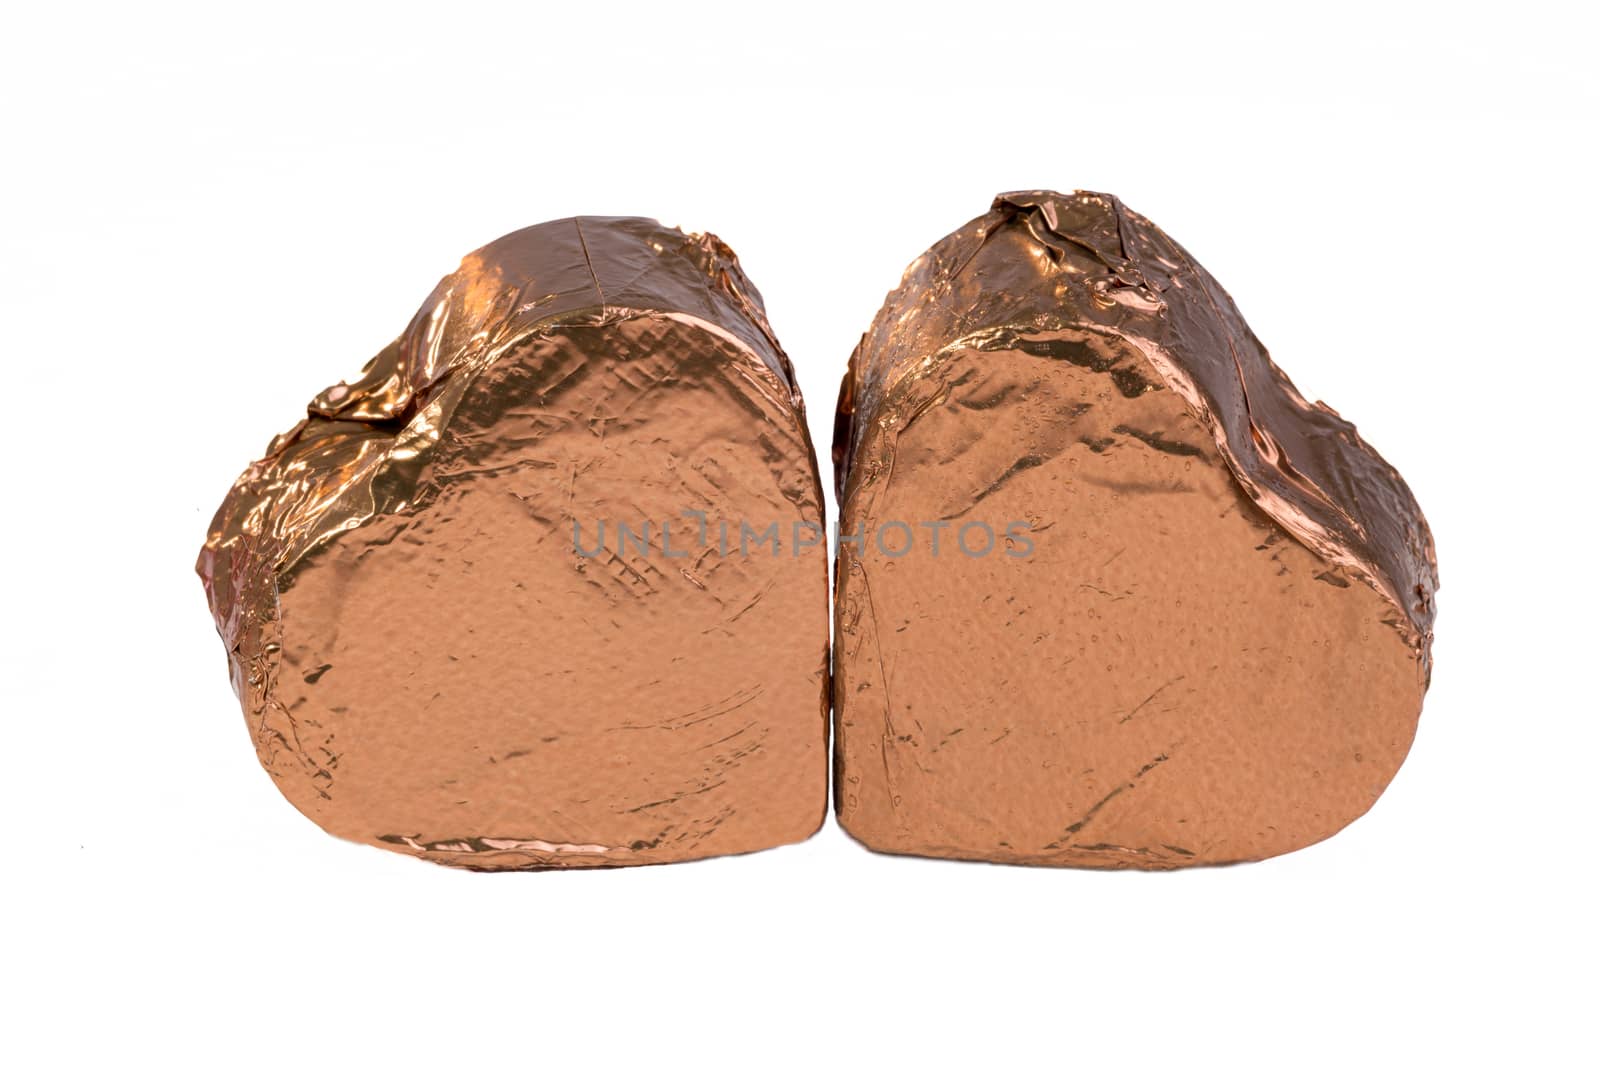 Two chocolate hearts together in brown wrapping foil, close to each other.